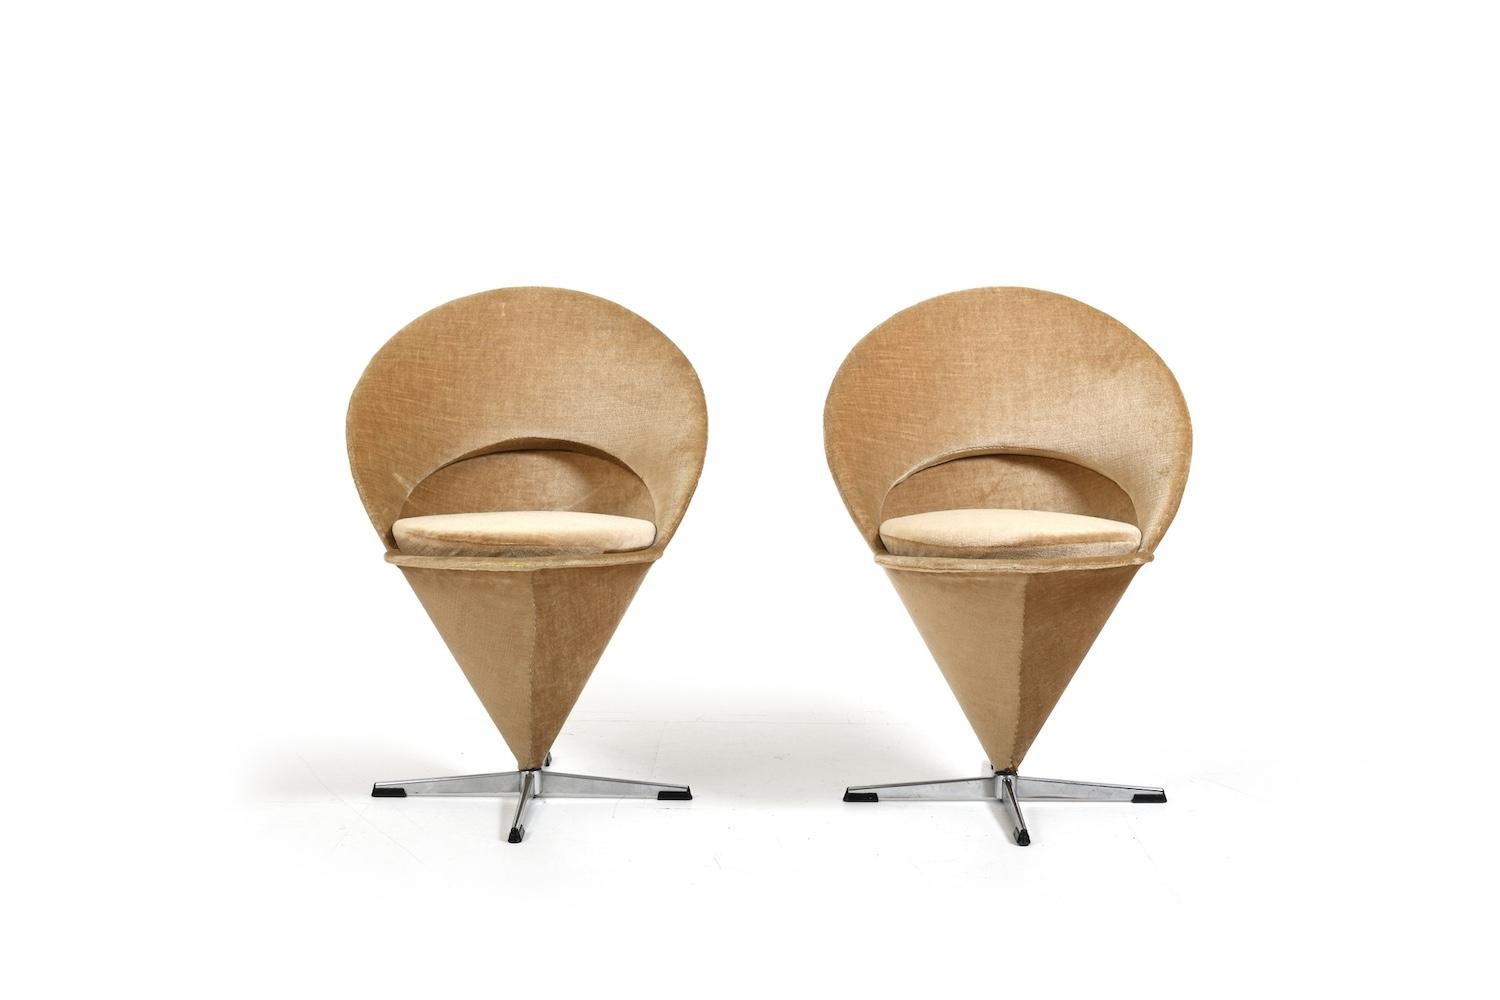 Scandinavian Modern Pair of 1970s Verner Panton Cone Chairs by Plus Linje For Sale